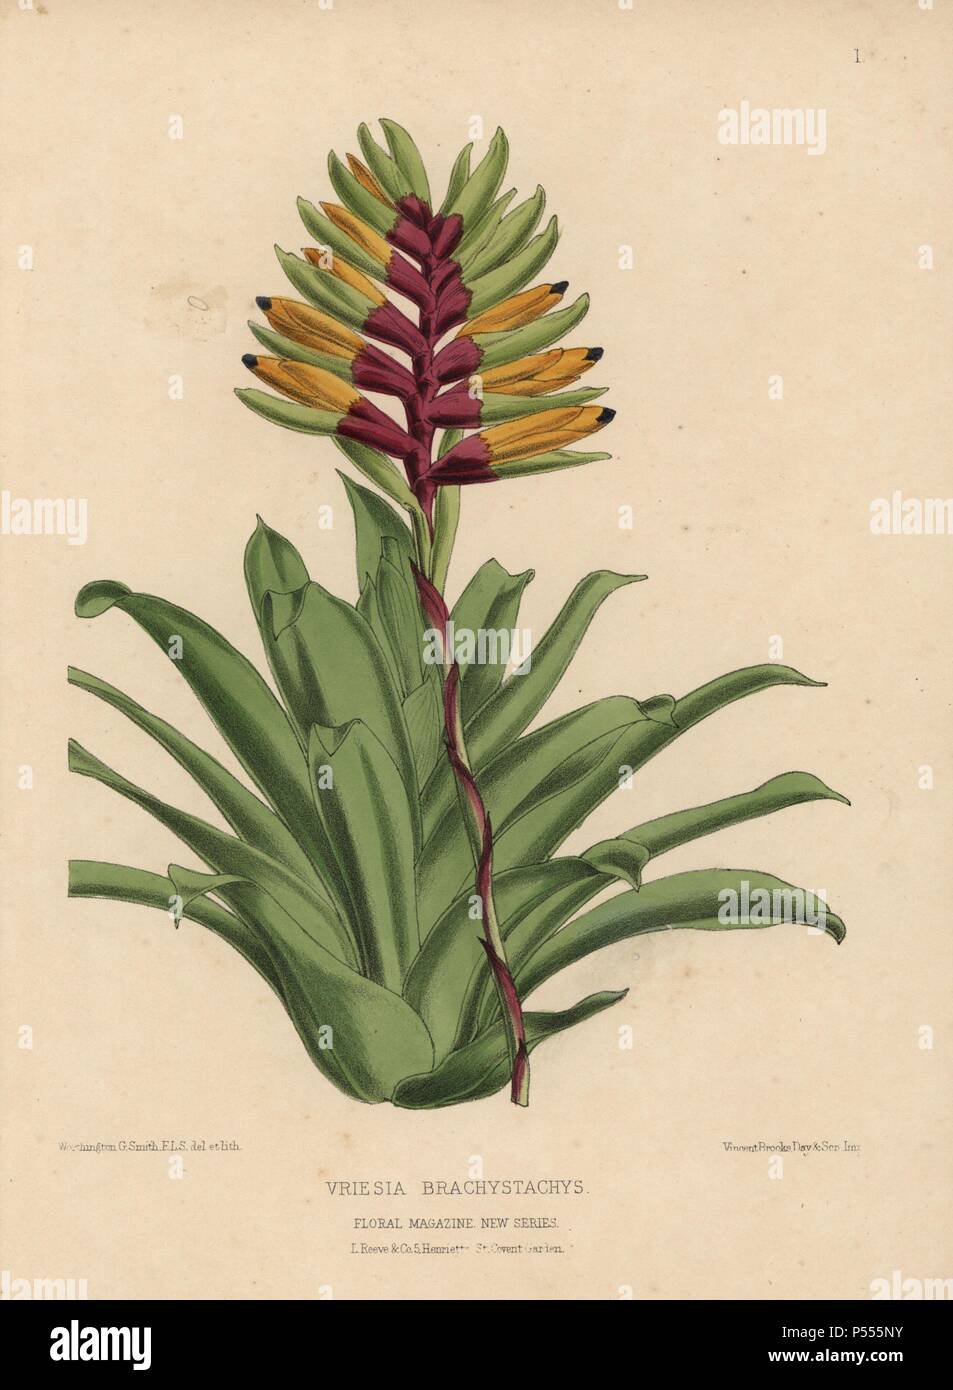 Vriesia brachystachys, a handsome compact plant with spikes of gold and crimson flowers.. Handcolored botanical drawn and lithographed by W.G. Smith from H.H. Dombrain's 'Floral Magazine' 1872.. Worthington G. Smith (1835-1917), architect, engraver and mycologist. Smith also illustrated 'The Gardener's Chronicle.' Henry Honywood Dombrain (1818-1905), clergyman gardener, was editor of the 'Floral Magazine' from 1862 to 1873. Stock Photo